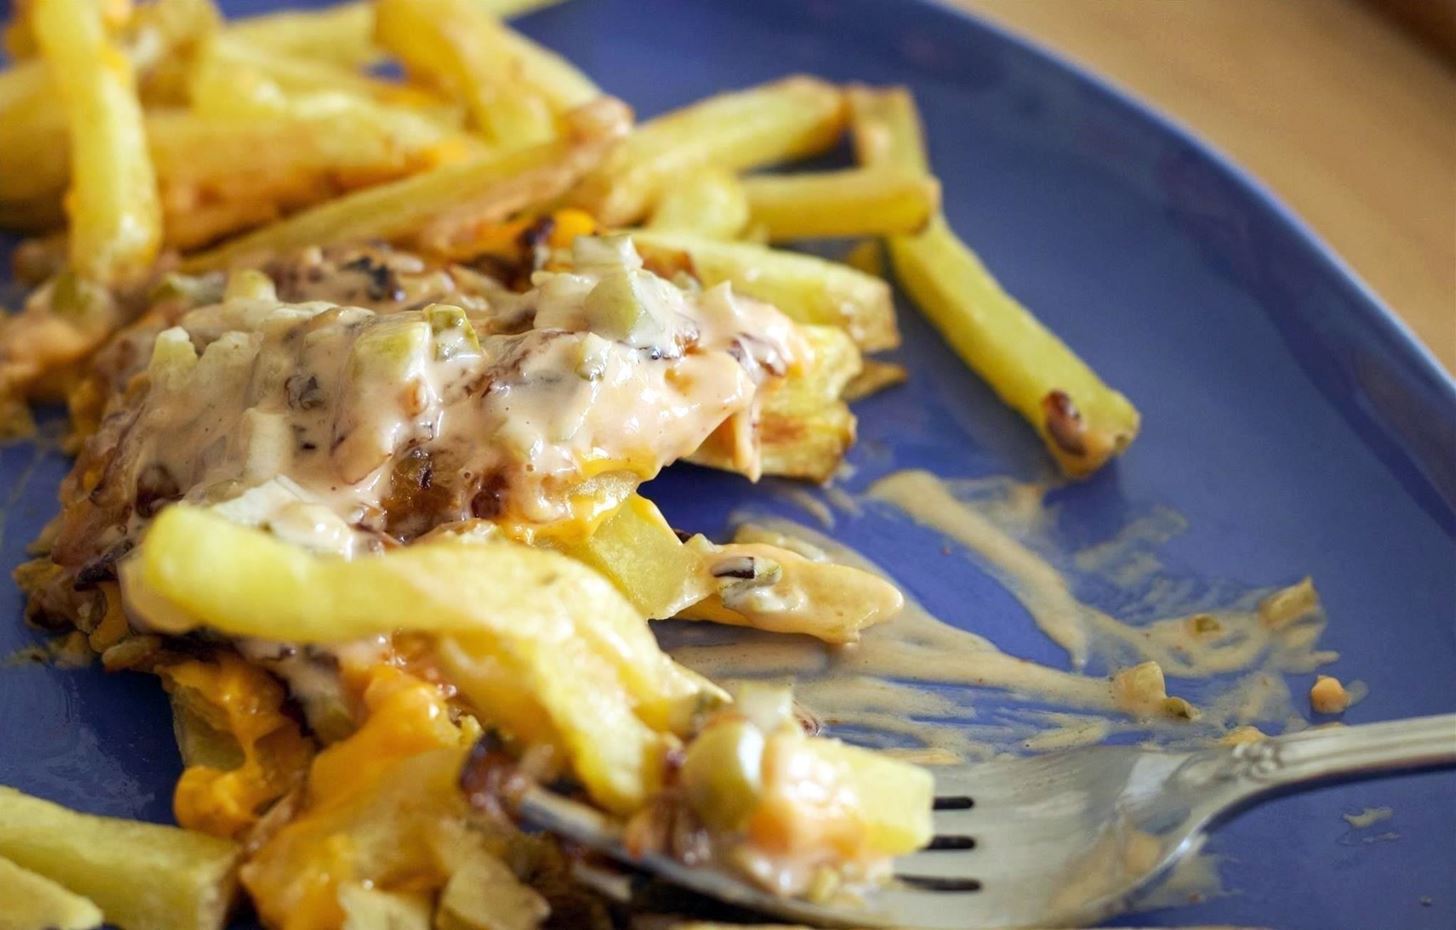 How to Make In-N-Out's Famous Animal Style French Fries at Home